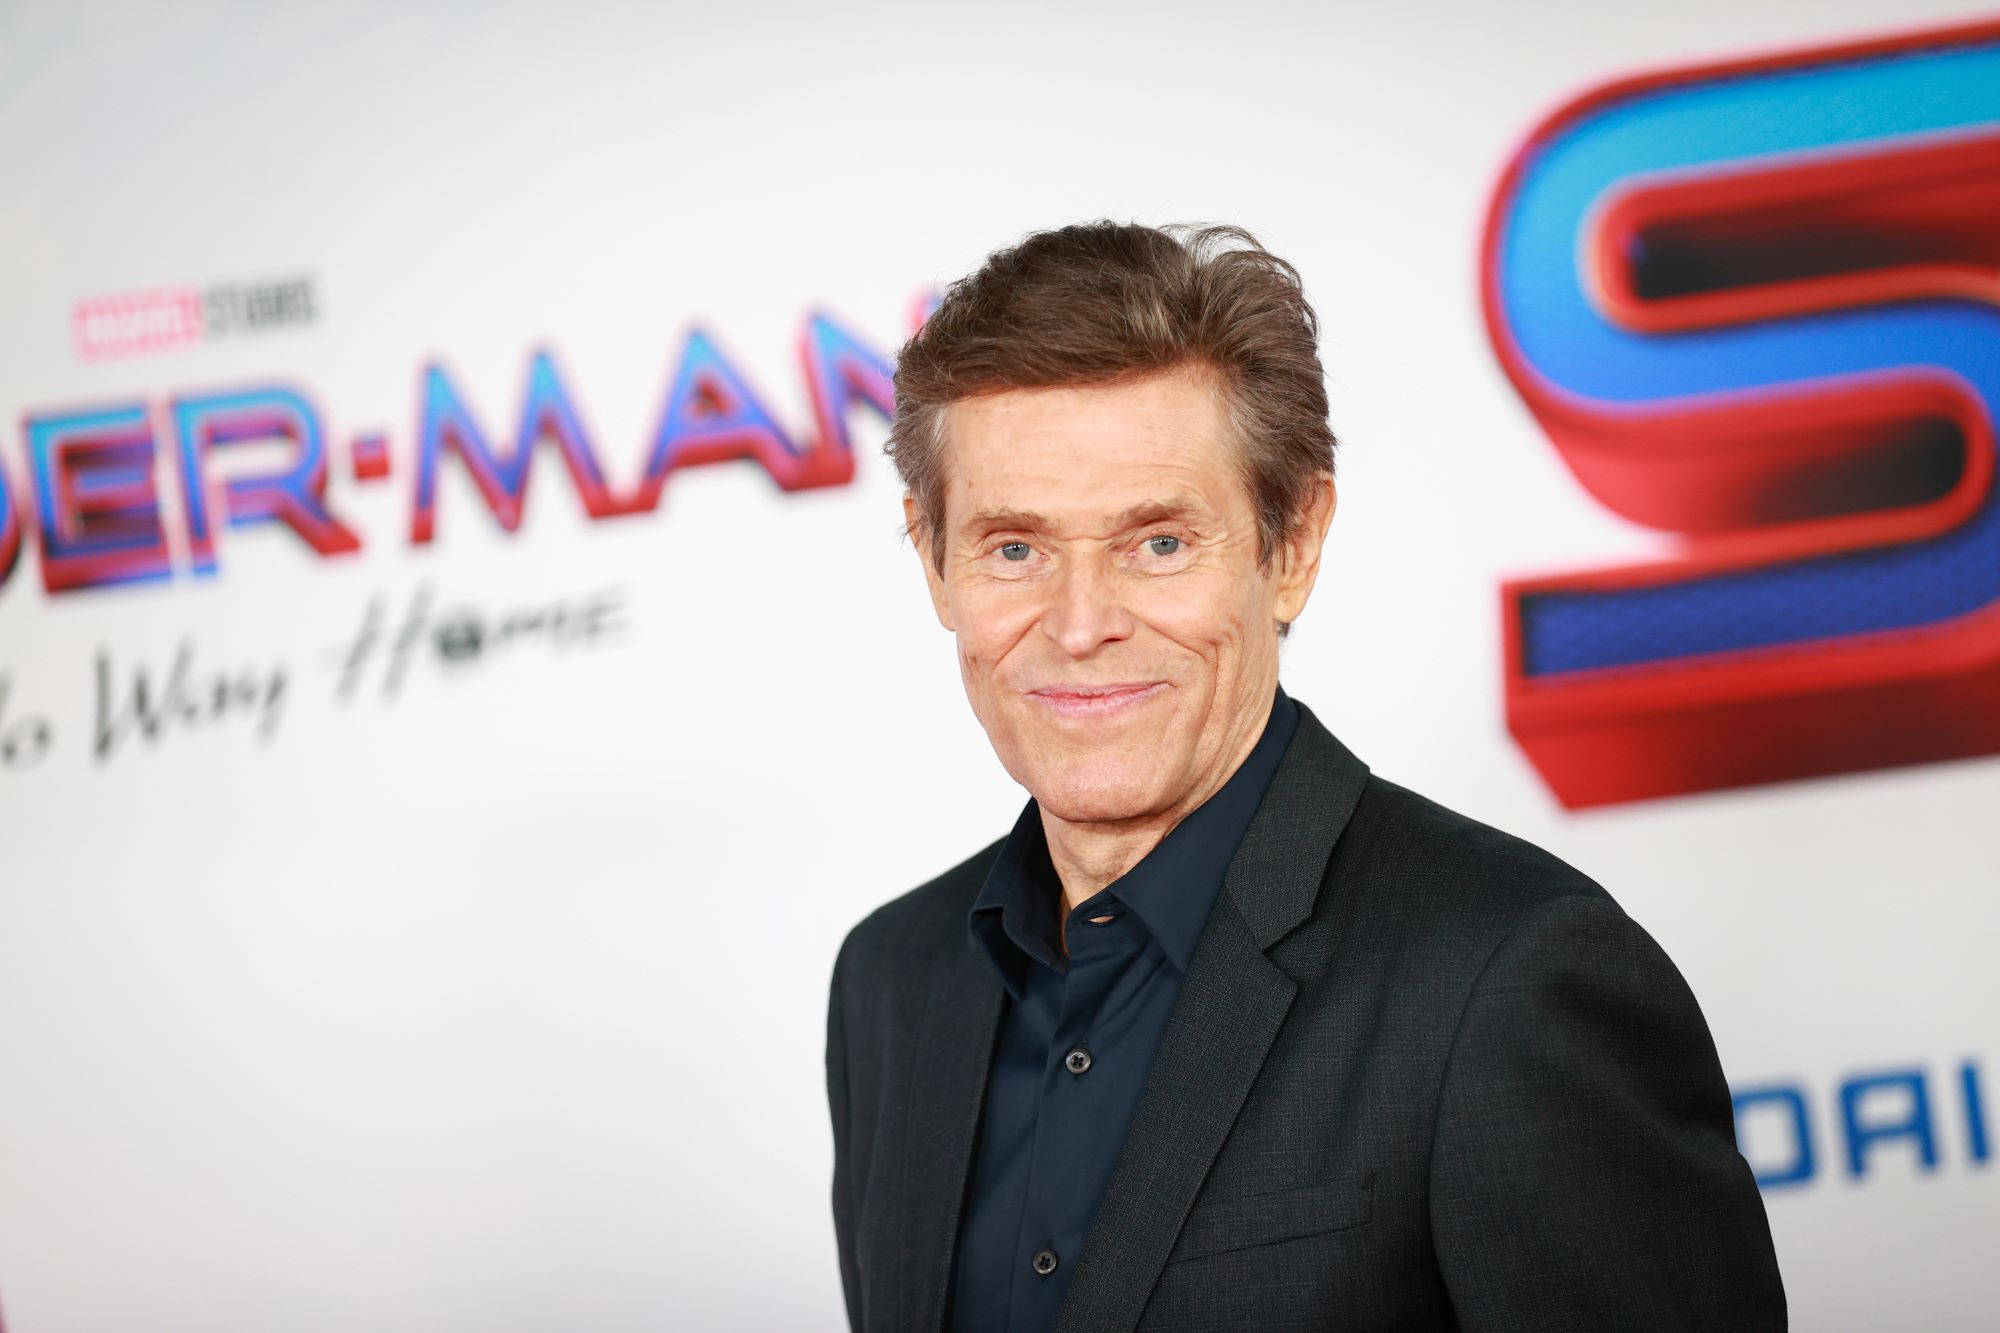 Willem Dafoe, who plays a member of the Sinister Six in 'Spider-Man: No Way Home,' wears a black suit over a dark blue button-up shirt.